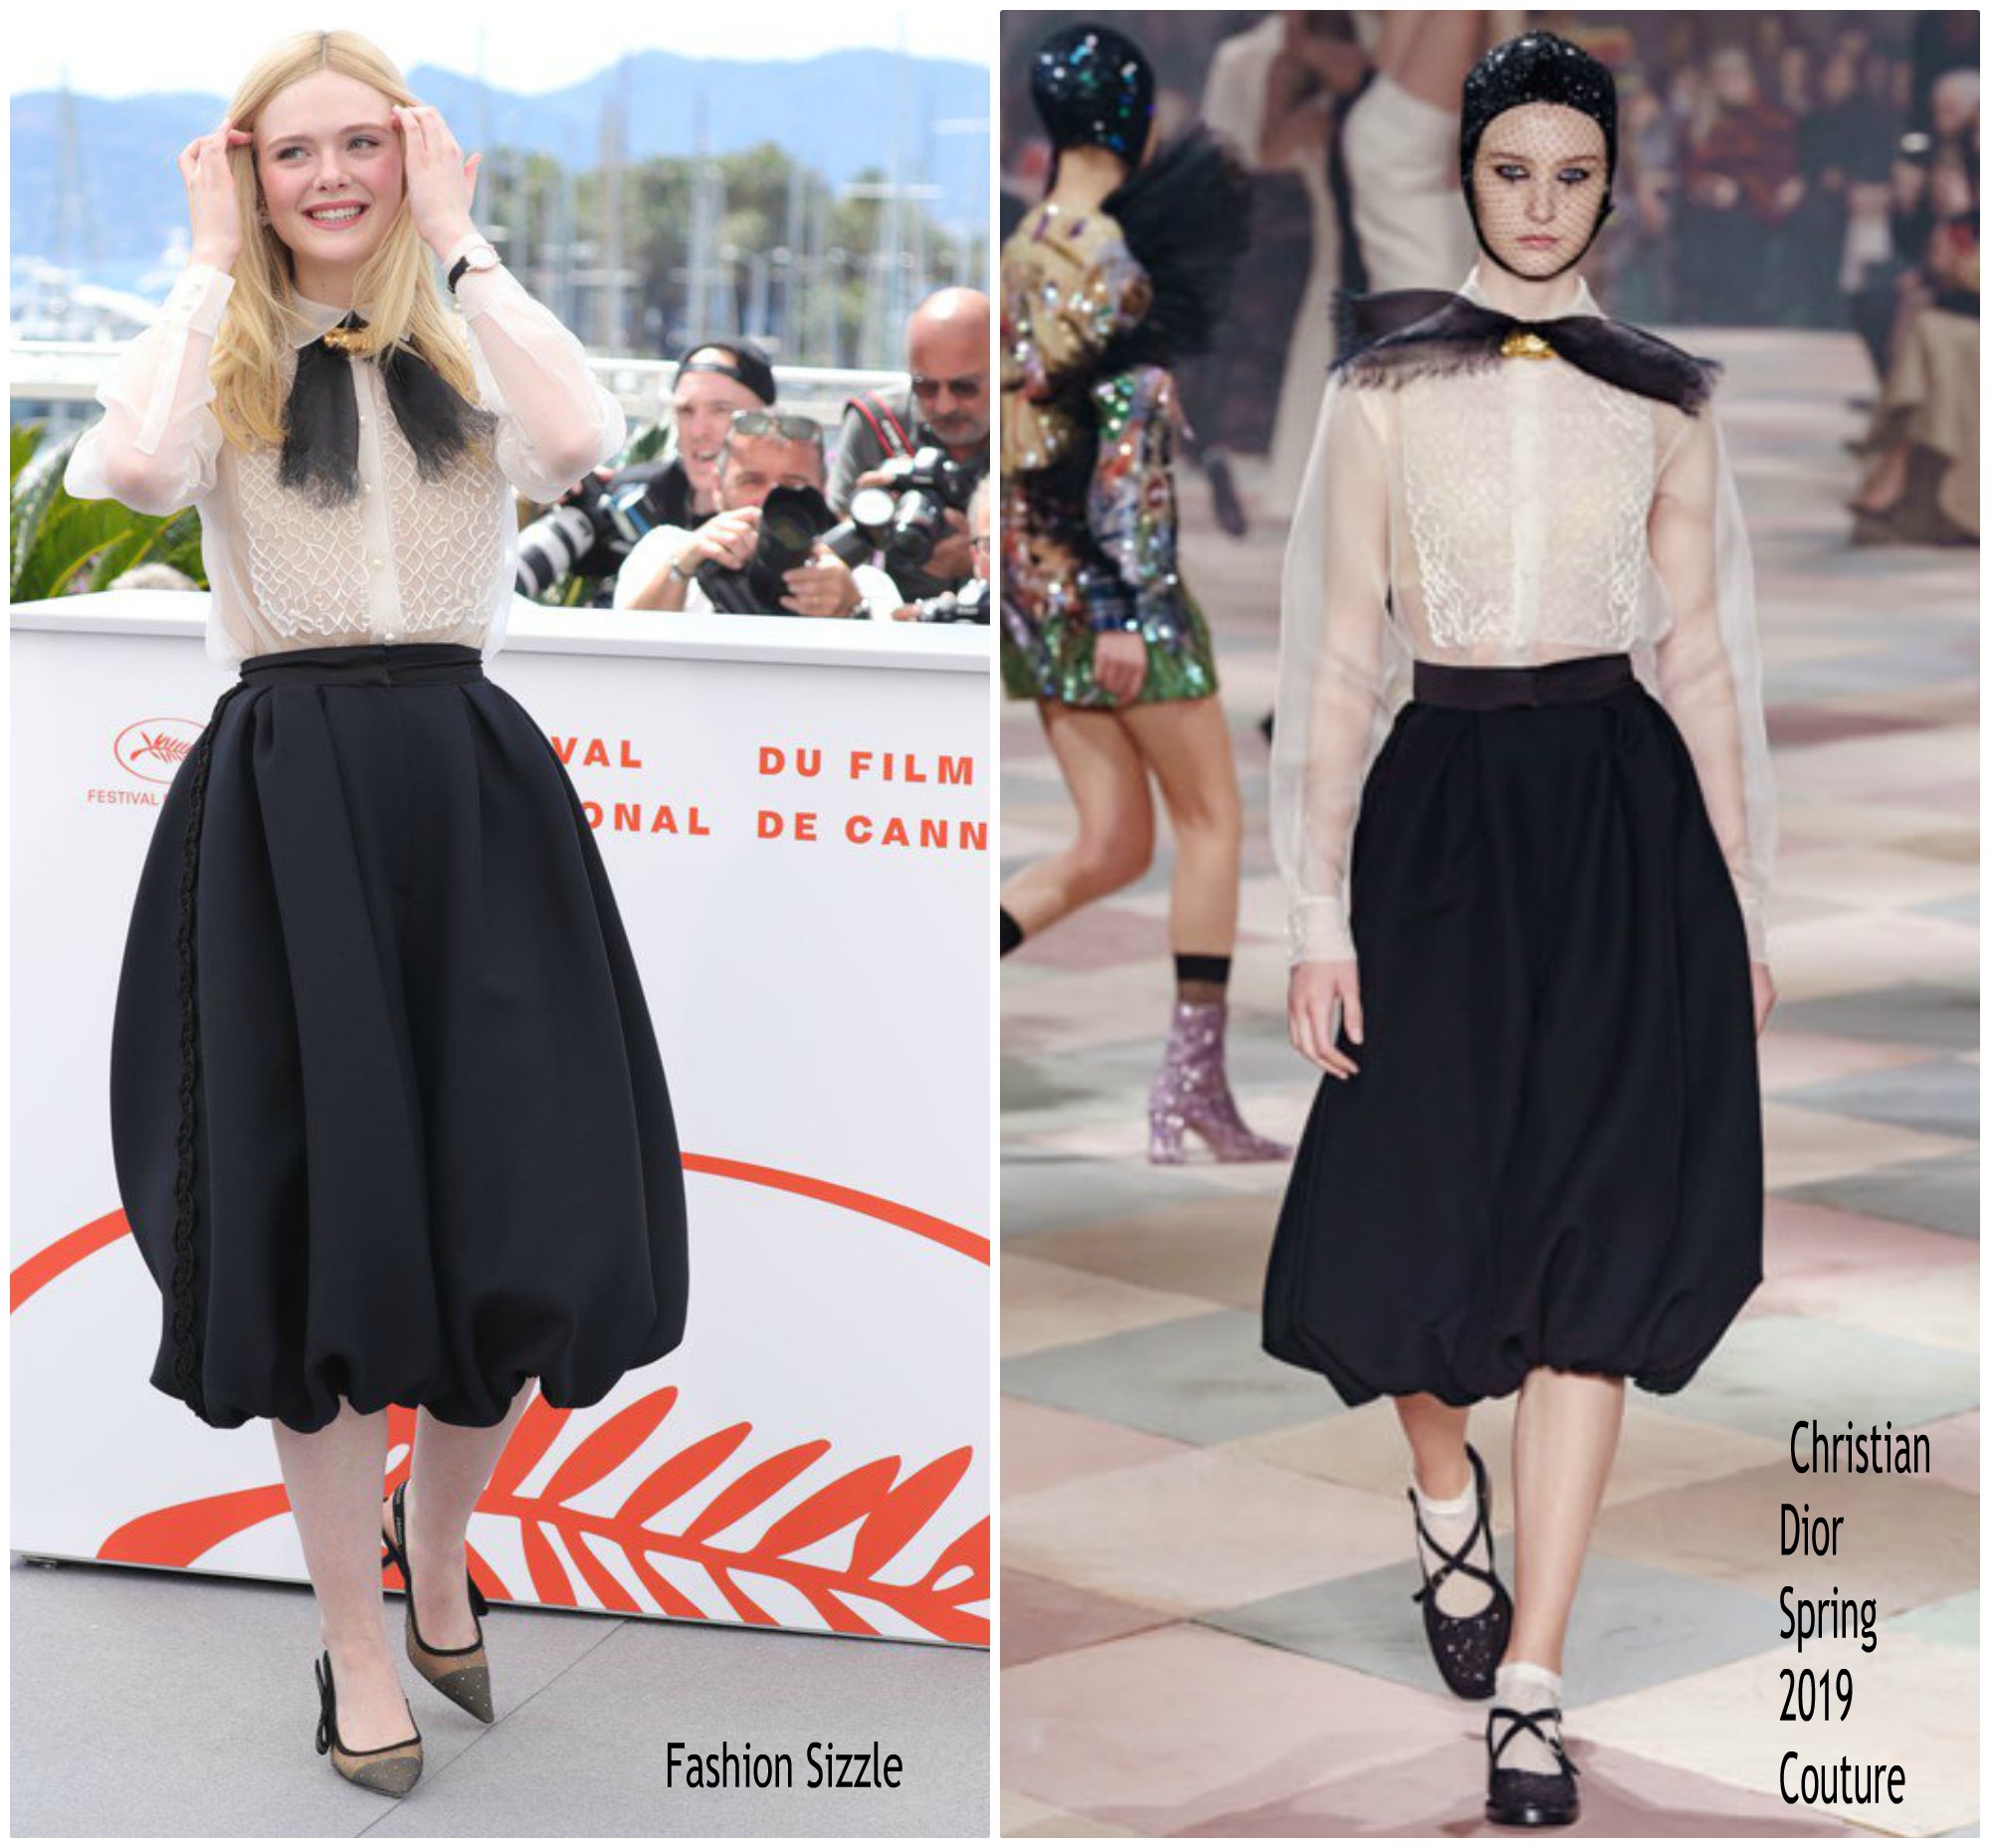 Elle Fanning in Christian Dior Haute Couture @ the 72nd Cannes Film Festival Jury Photocall